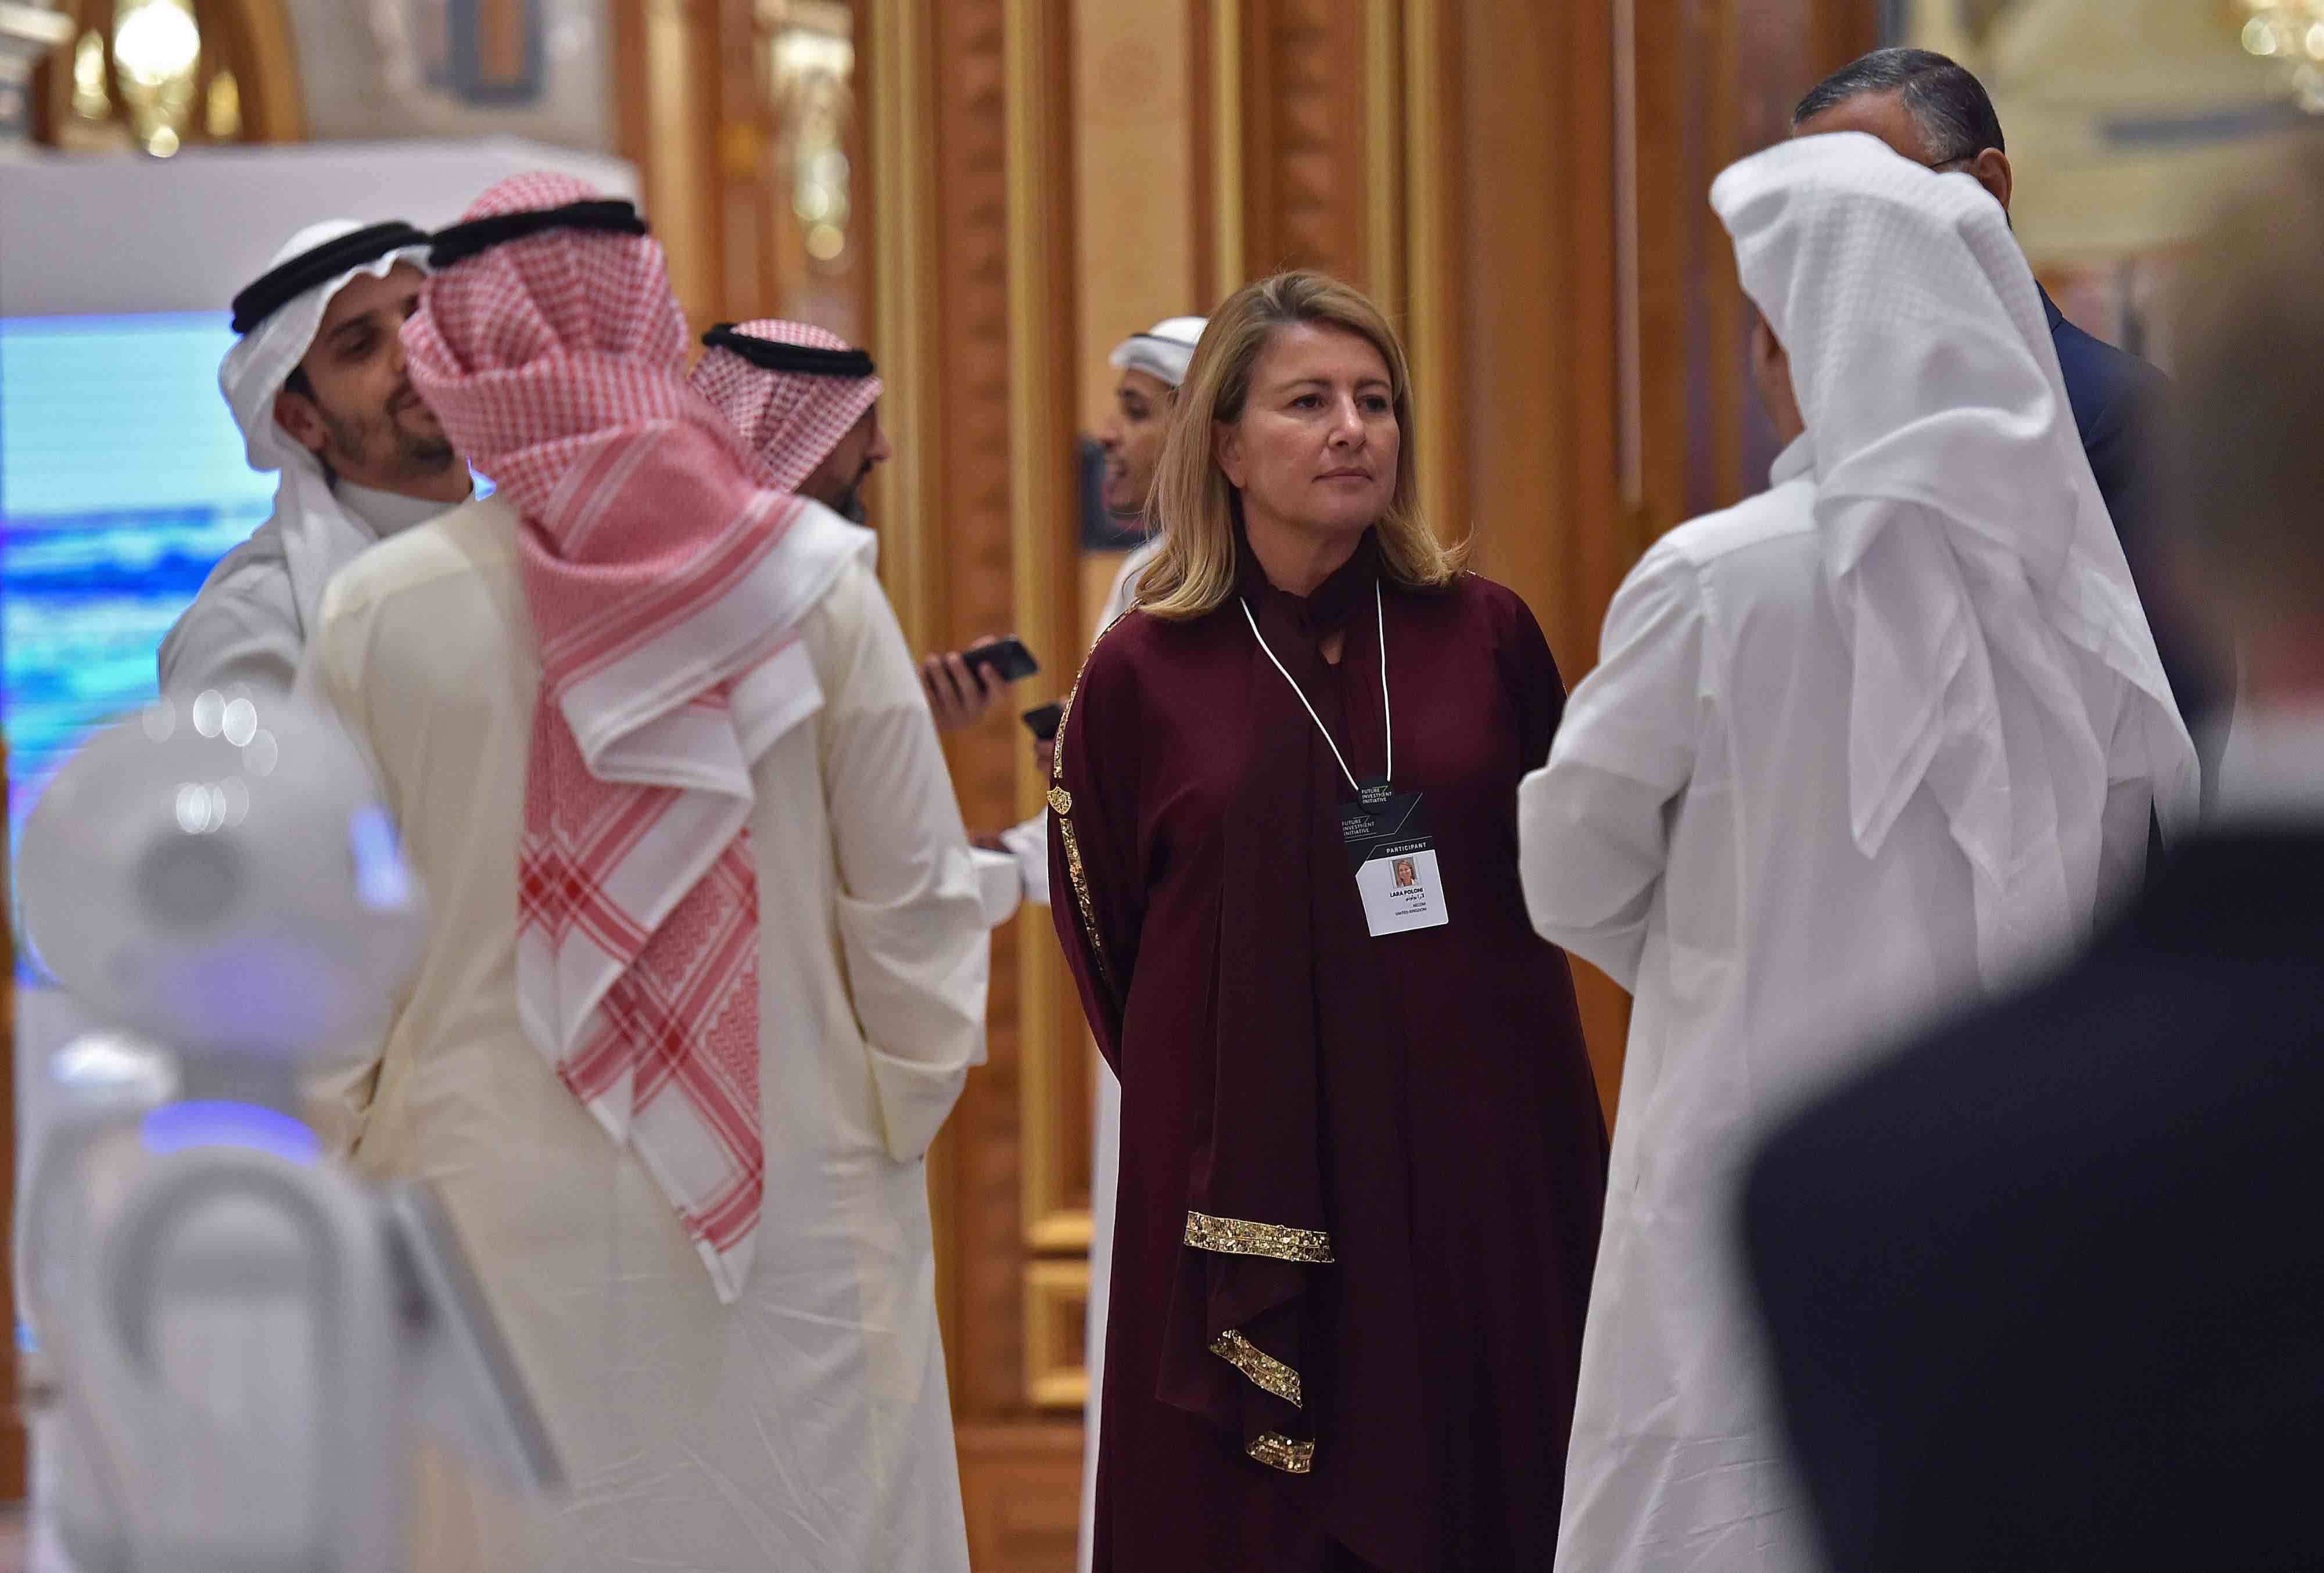 The end of the abaya requirement for foreign women came late last month as part of the kingdom unveiling tourism visas.